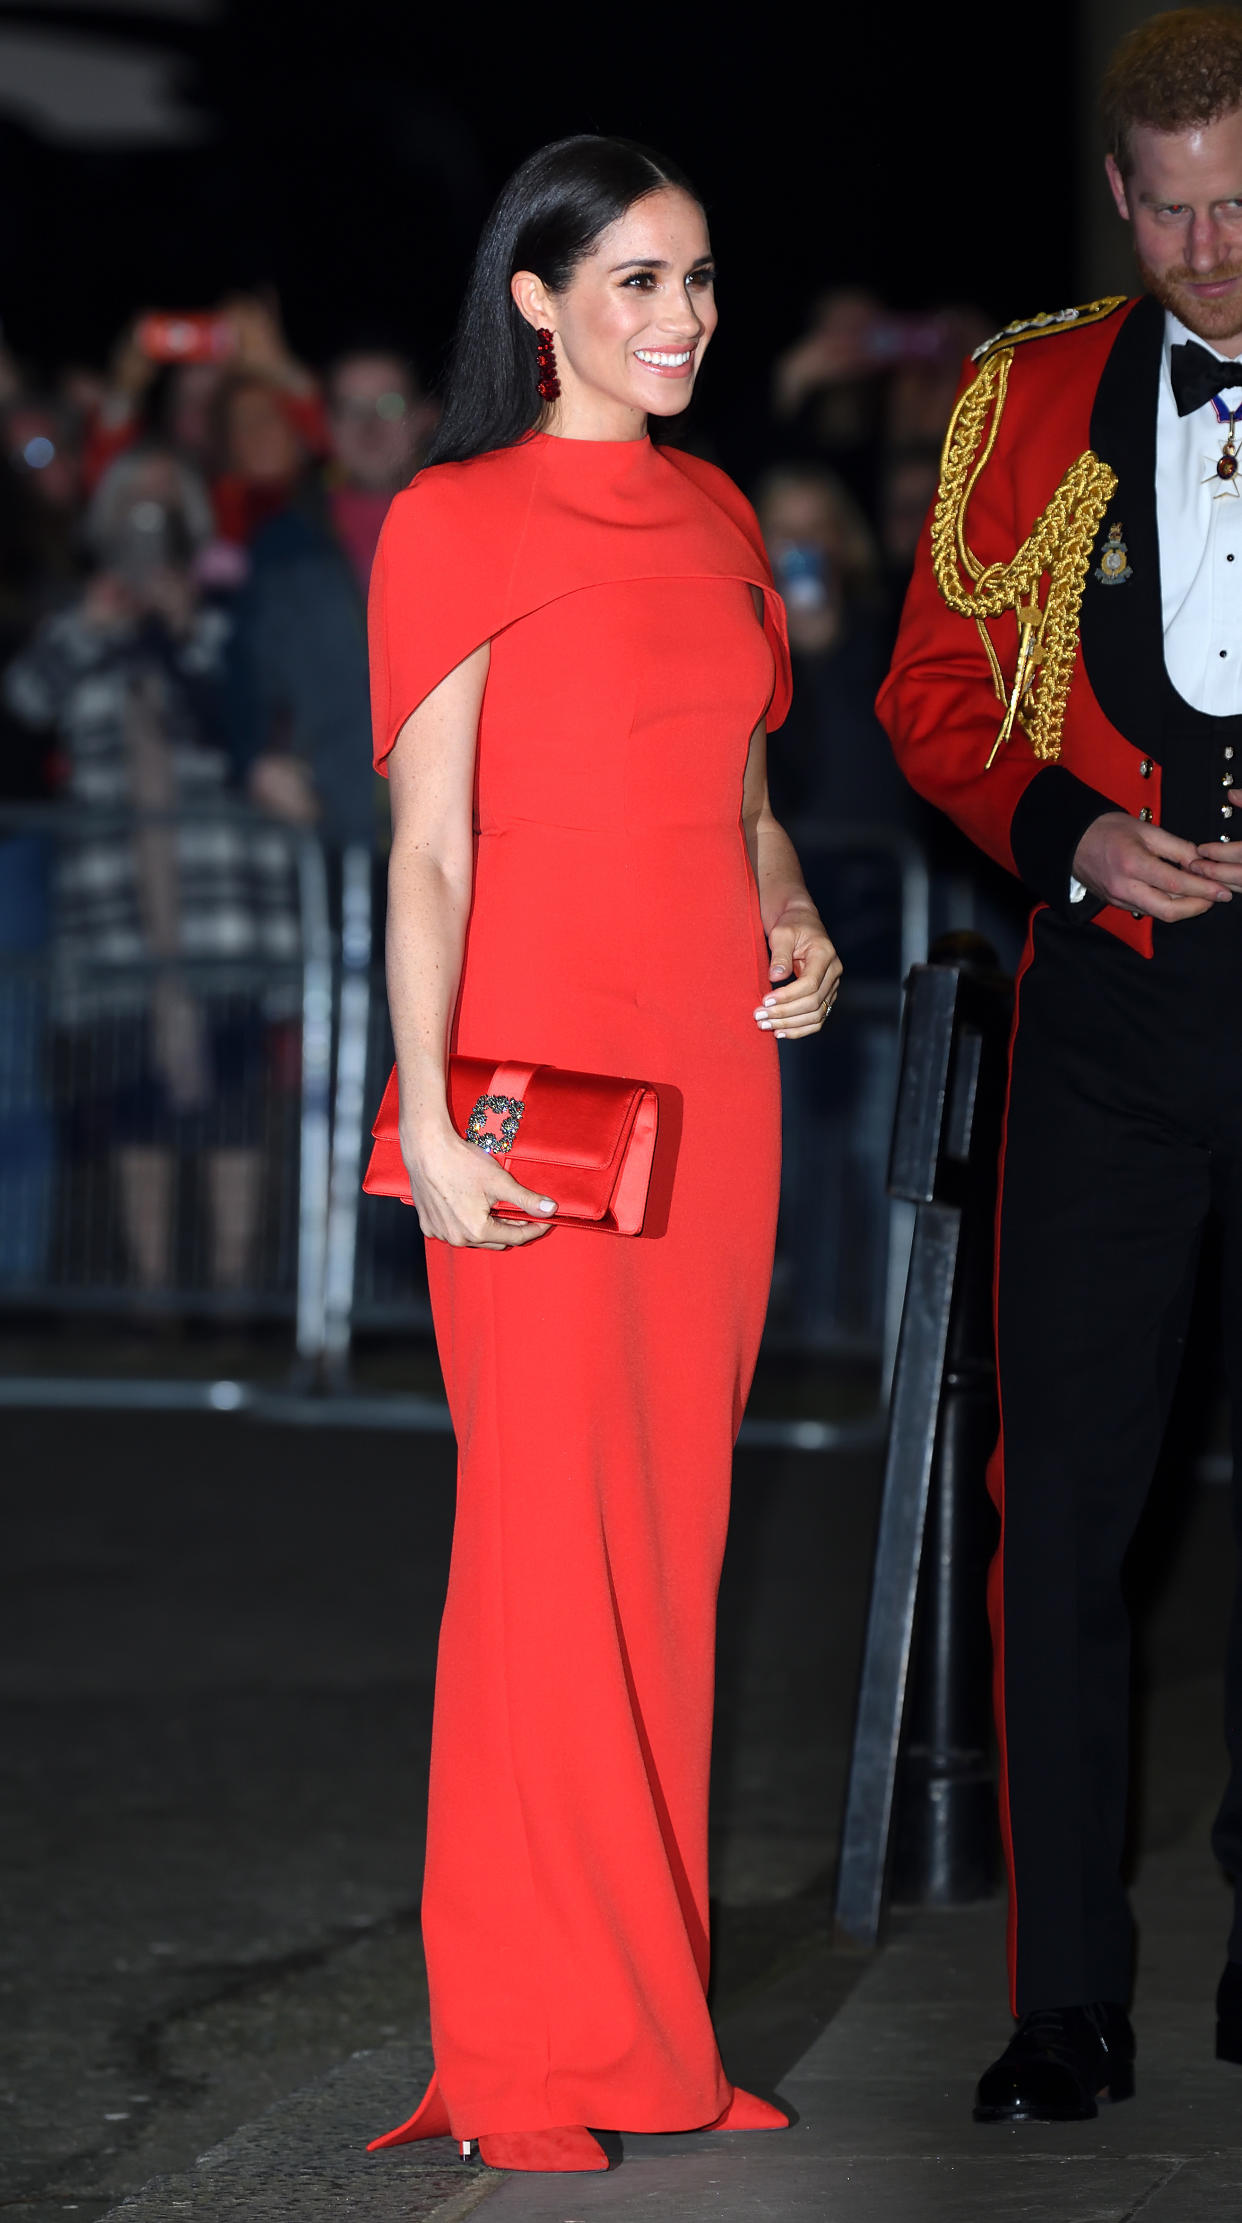 Meghan Markle wears a bright red gown as she attends an event in March 2020. She began began wearing red dresses after she departed the royal family. (Getty Images)